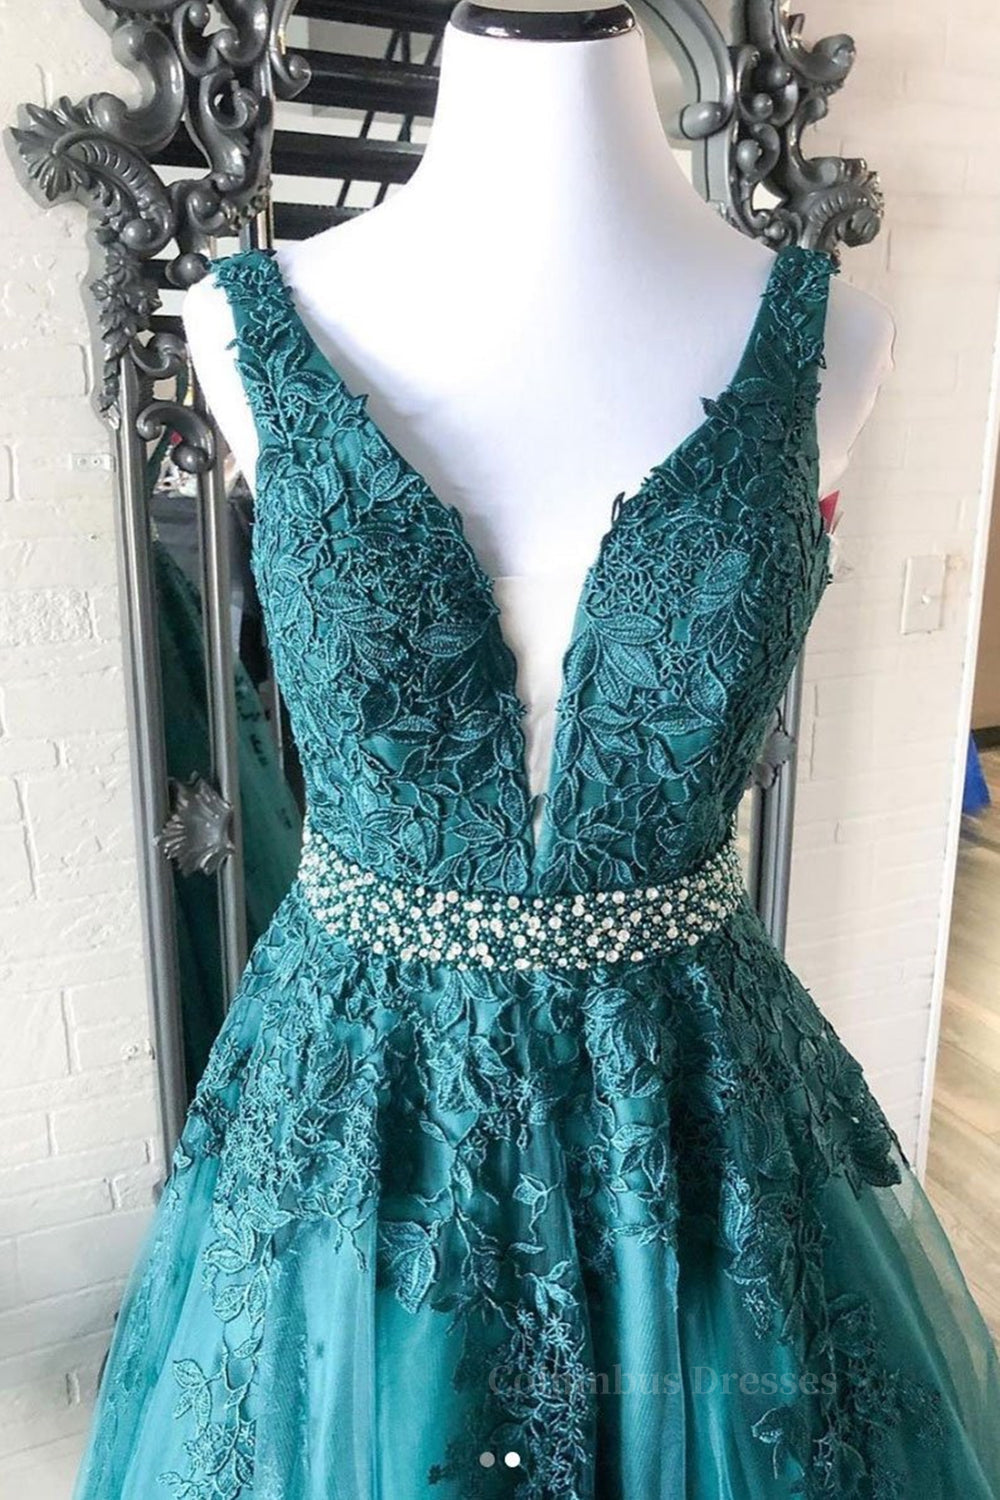 Bridesmaid Dresses Tulle, V Neck Green Lace Long Prom Dress with Beaded Belt, Long Green Lace Formal Evening Dress